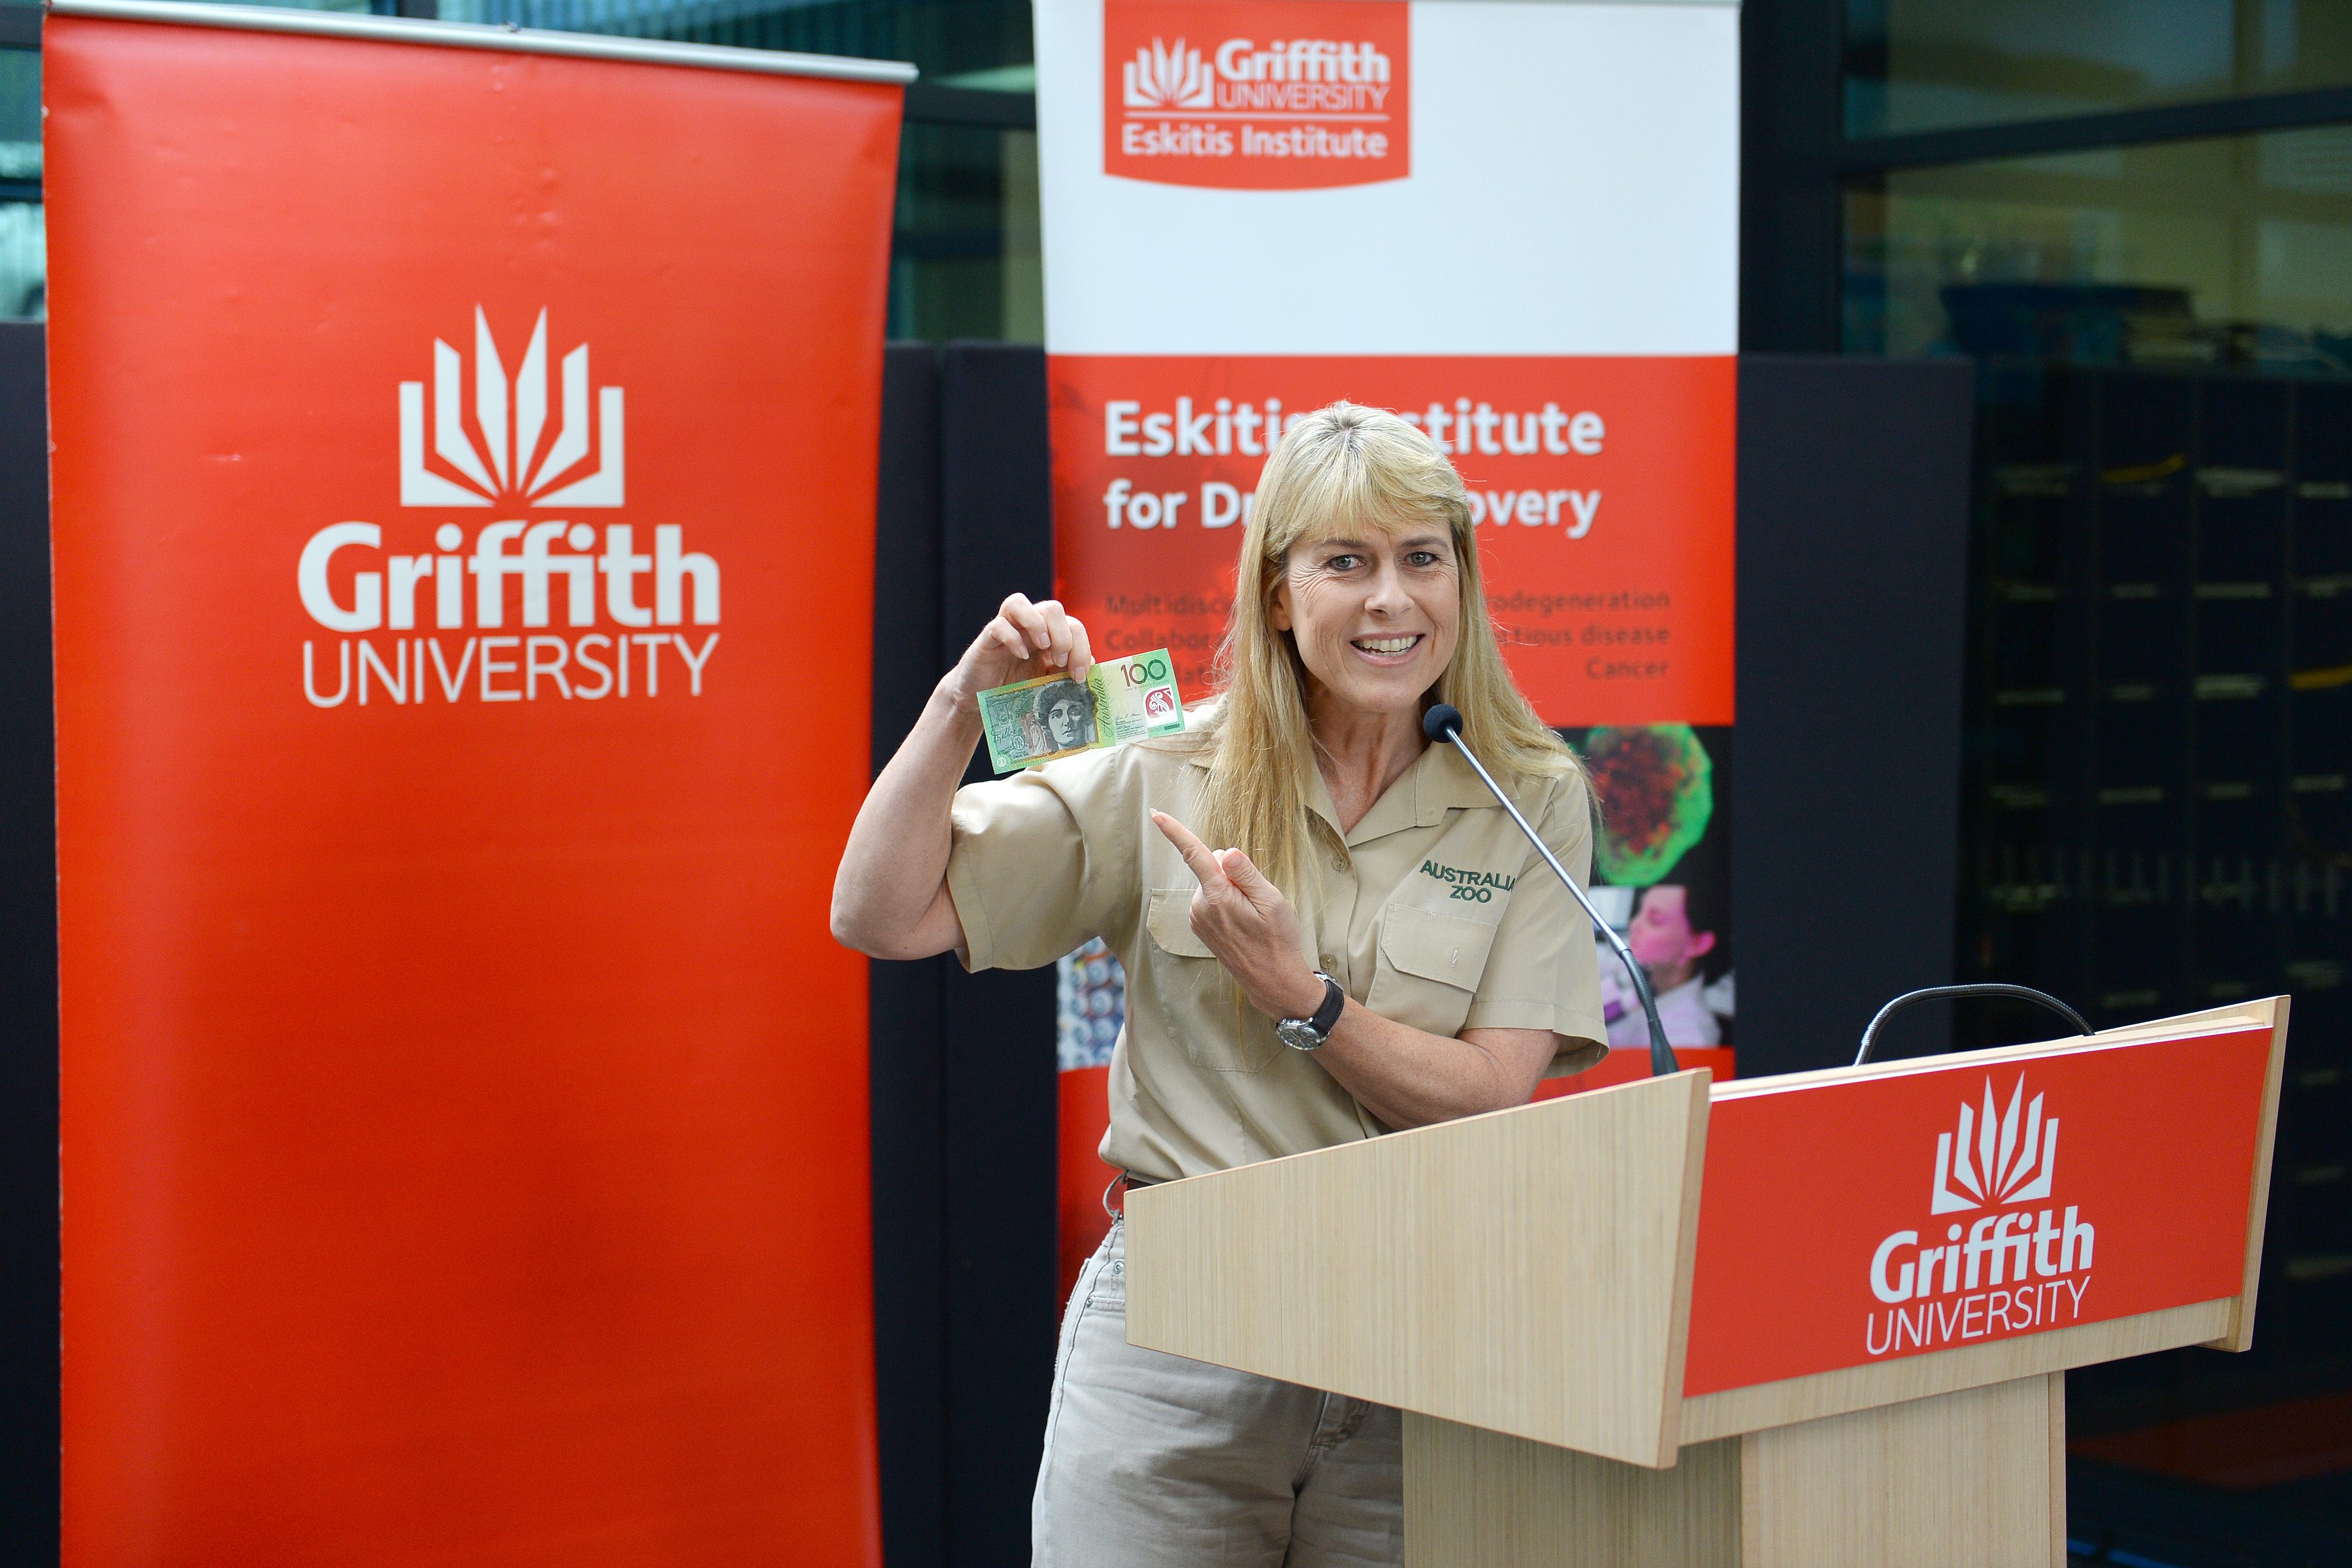 Mrs Terri Irwin officially launches the Eskitis Institute's Sponsor a Sample Campaign holding up a $100 note